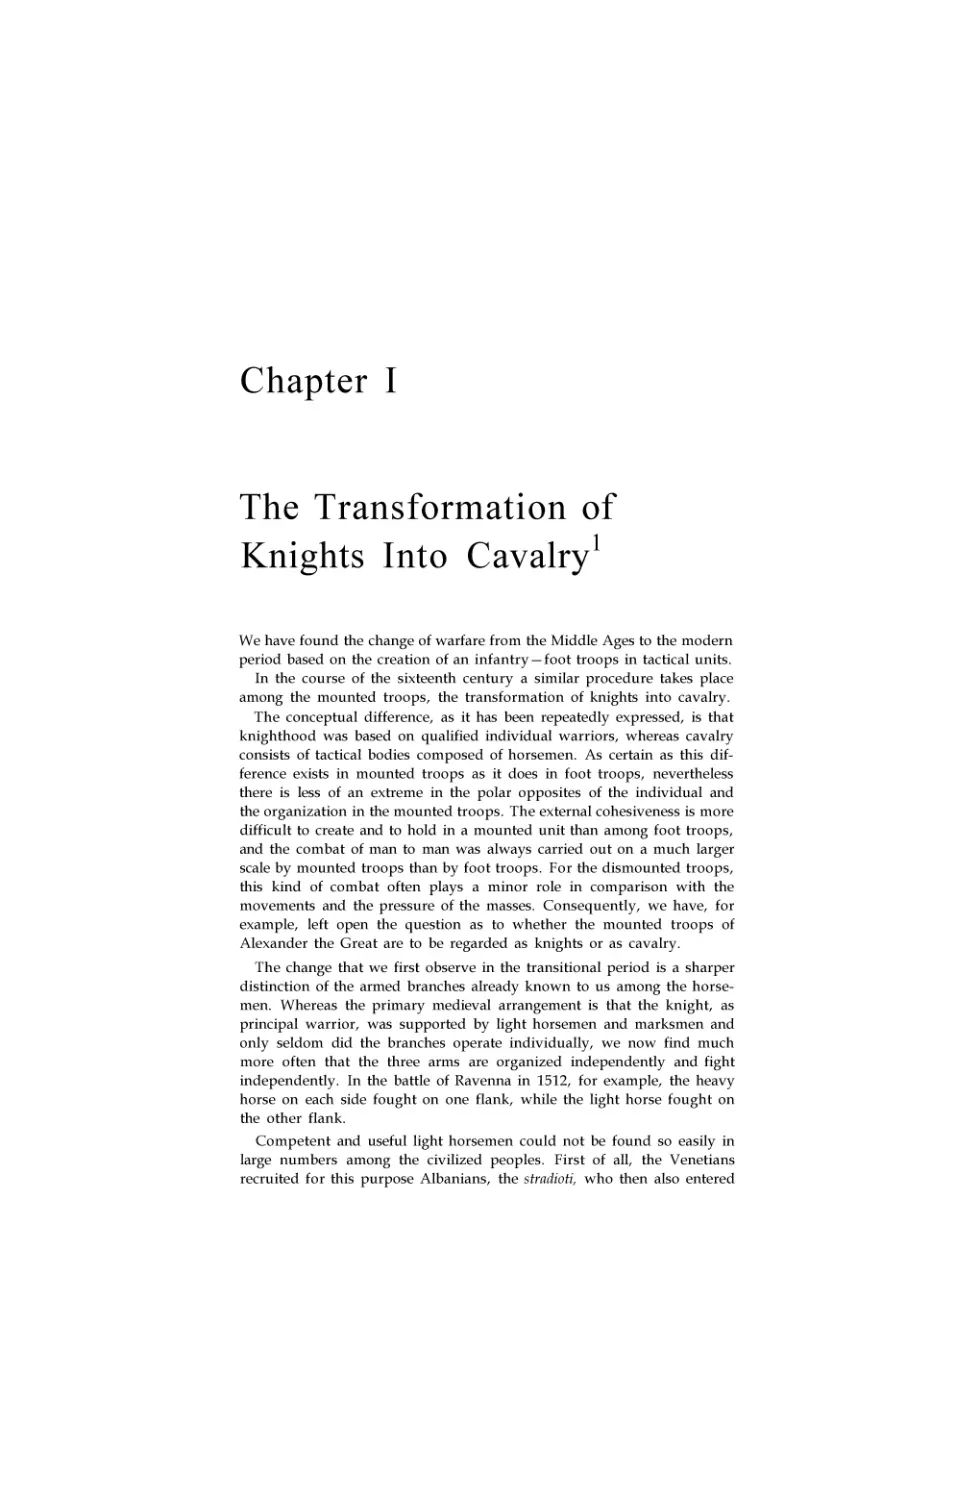 The Transformation of Knights Into Cavalry